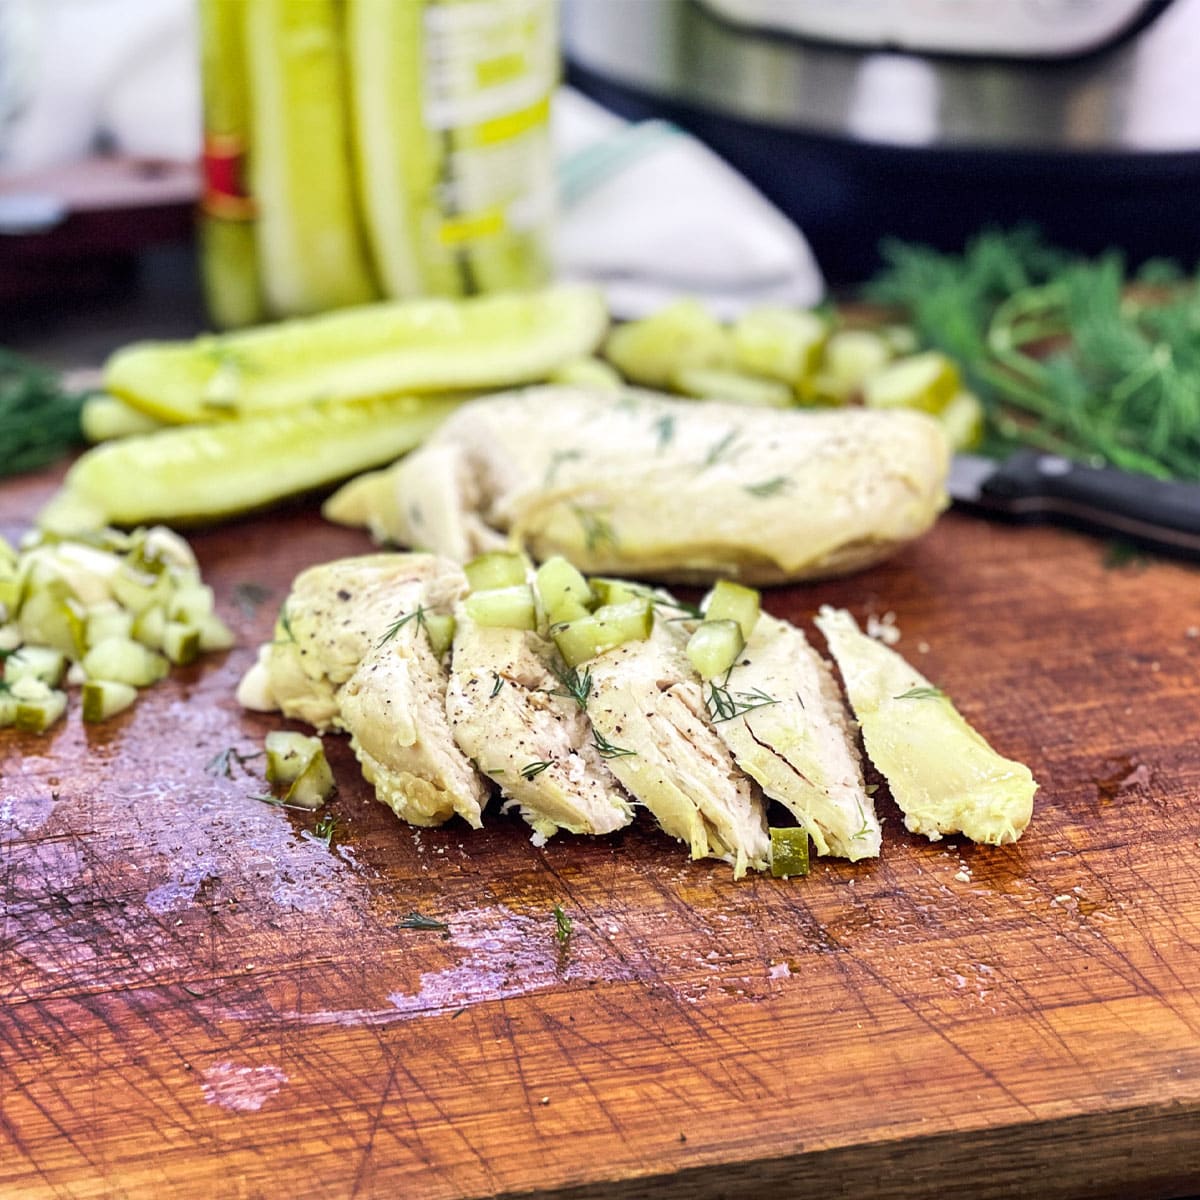 Sliced chicken breast on wooden board topped with chopped pickles, more pickles in background.